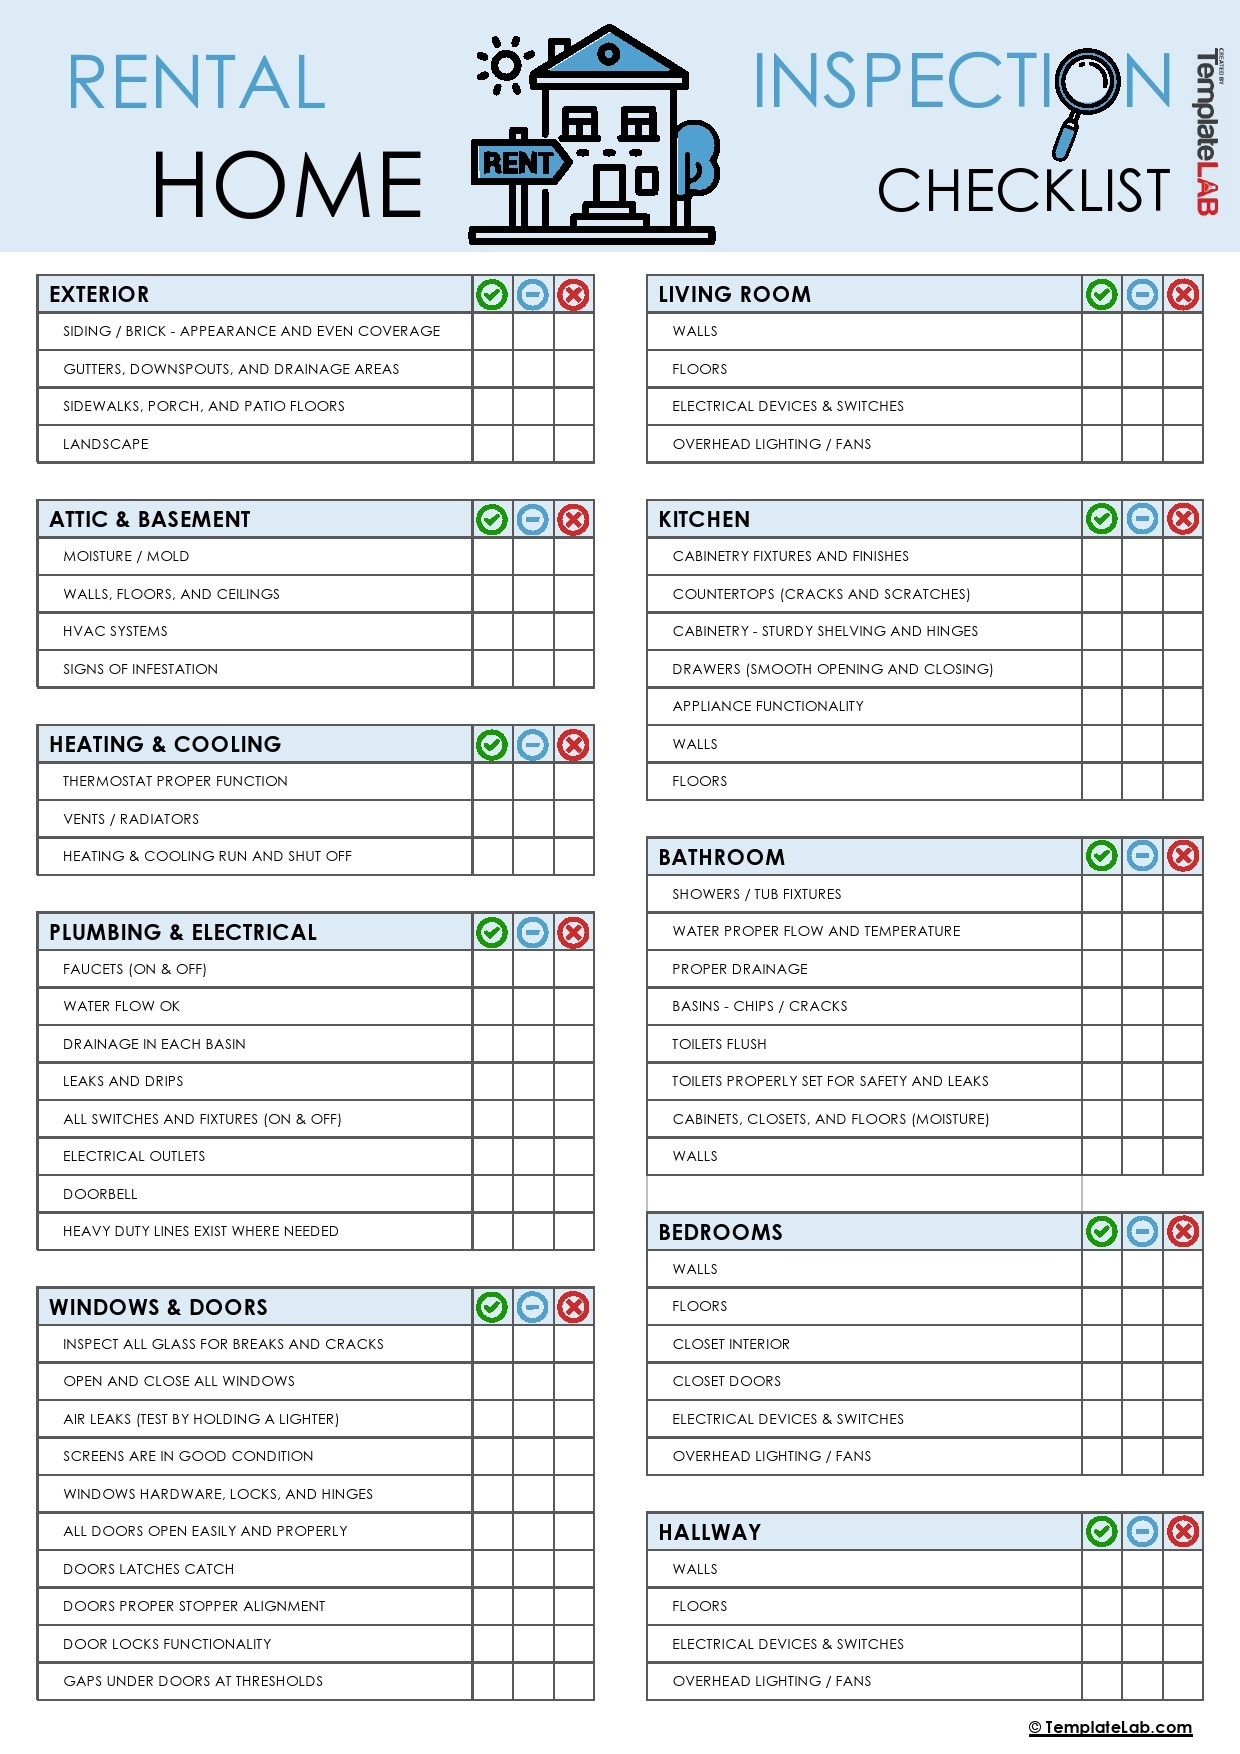 10+ Printable Home Inspection Checklists (Word, PDF) ᐅ TemplateLab Within Home Inspector Checklist Template With Home Inspector Checklist Template